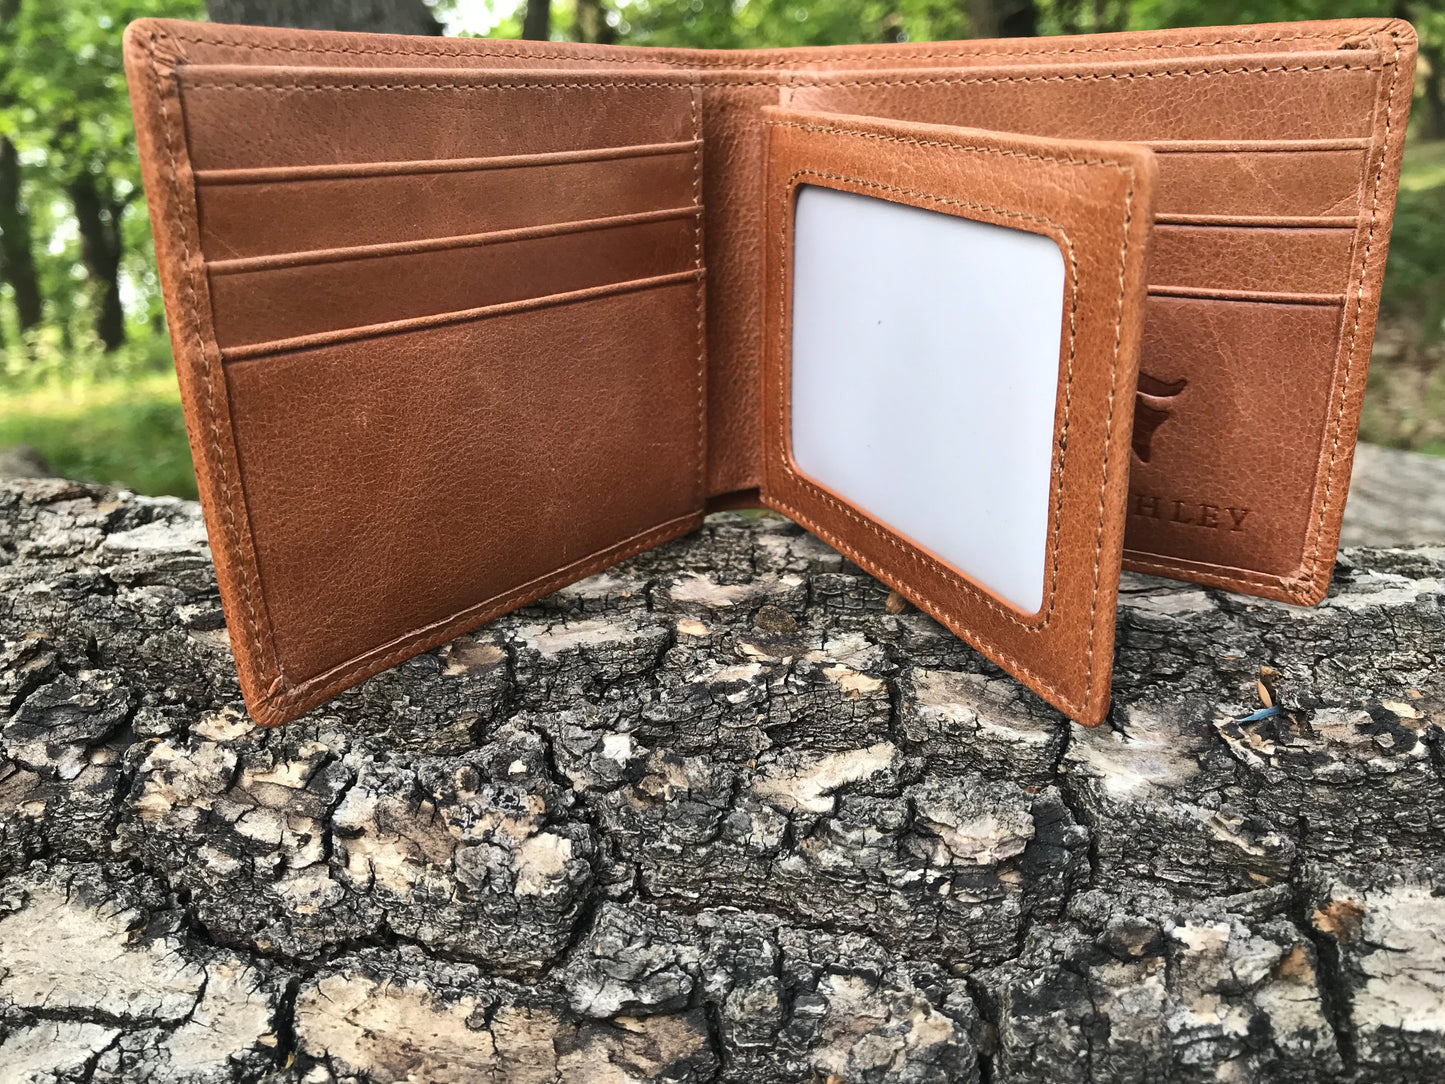 The Classic Wallet. An elegant handmade leather wallet by Burghley Bags in a classic tan colour. It features 6 card slots, 4 slip pockets and 2 compartments for notes/bills.